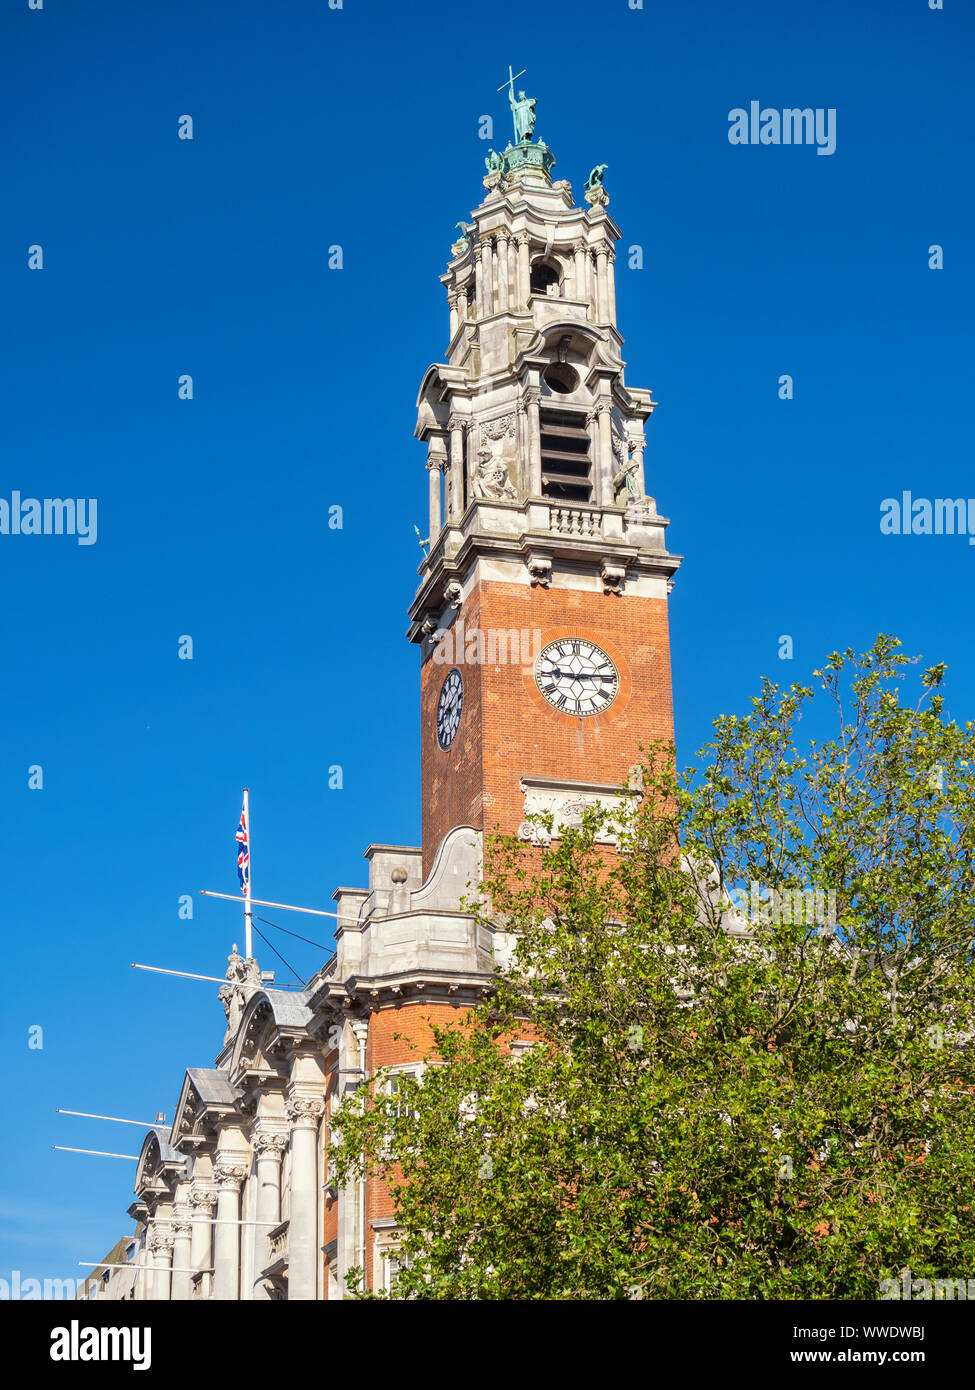 COLCHESTER, ESSEX - AUGUST 11, 2018:  The clock tower of the Town Hall Building Stock Photo